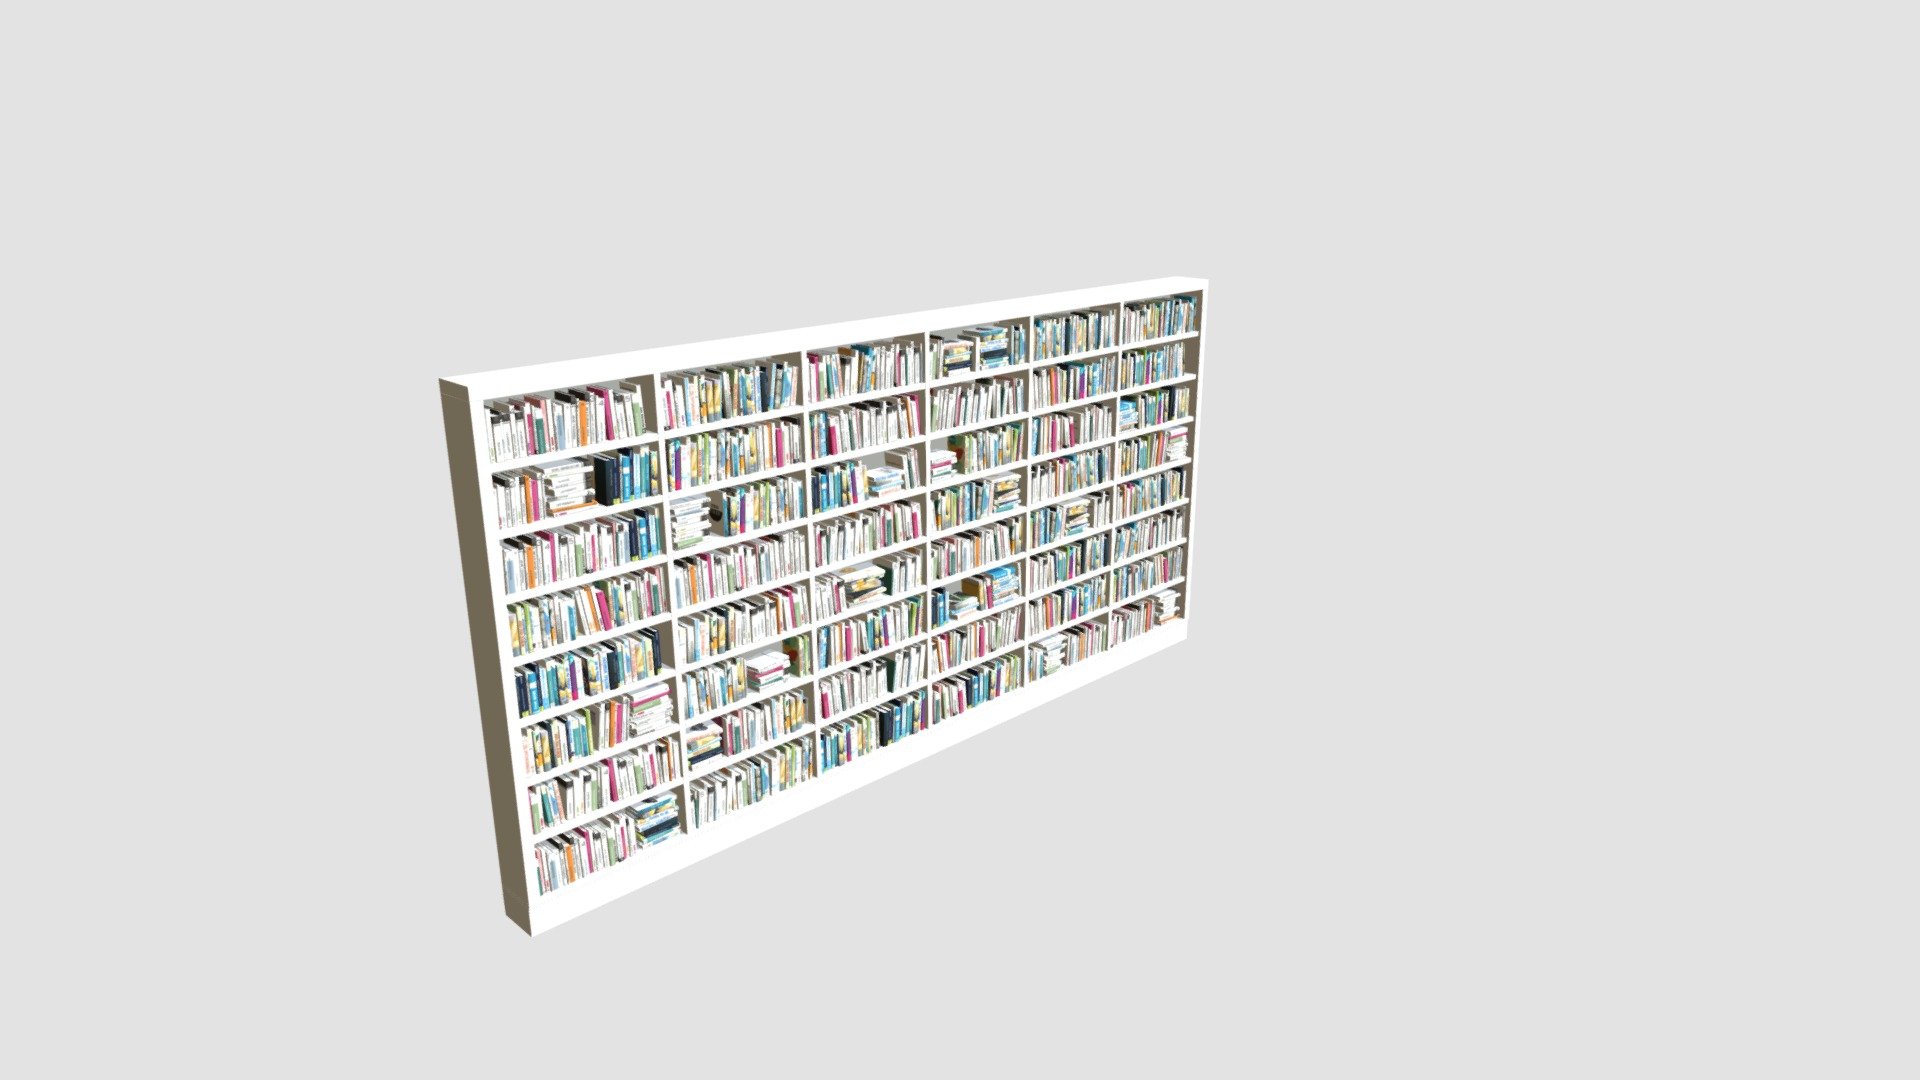 Highly detailed 3d model of bookshelf with all textures, shaders and materials. This 3d model is ready to use, just put it into your scene 3d model